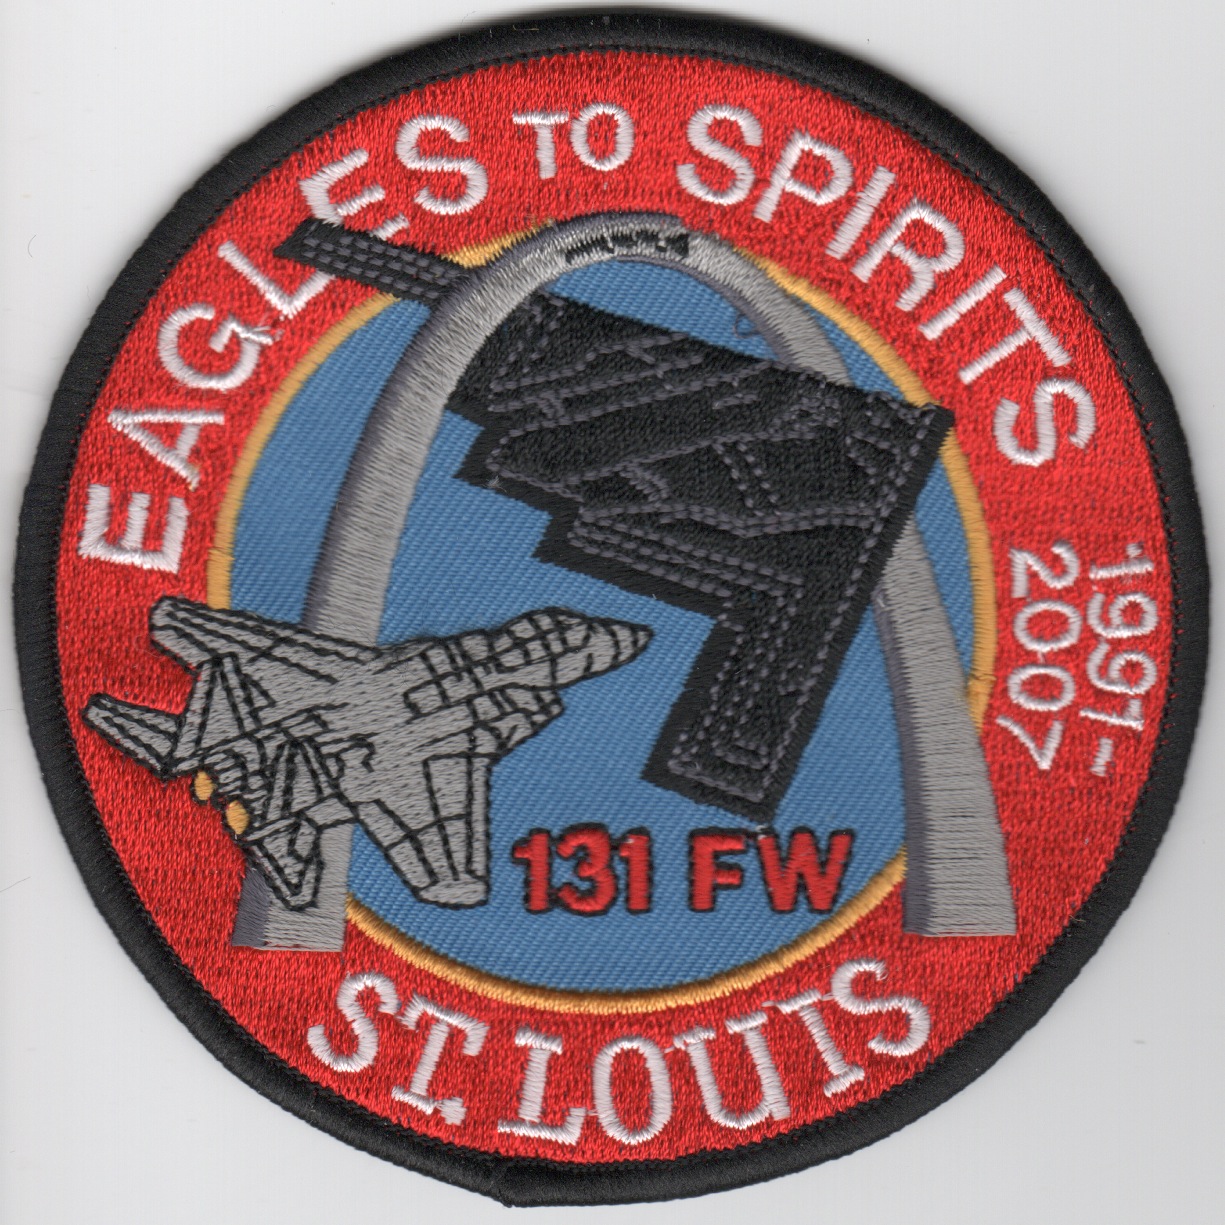 131FW 'Eagles-to-Spirits' Patch